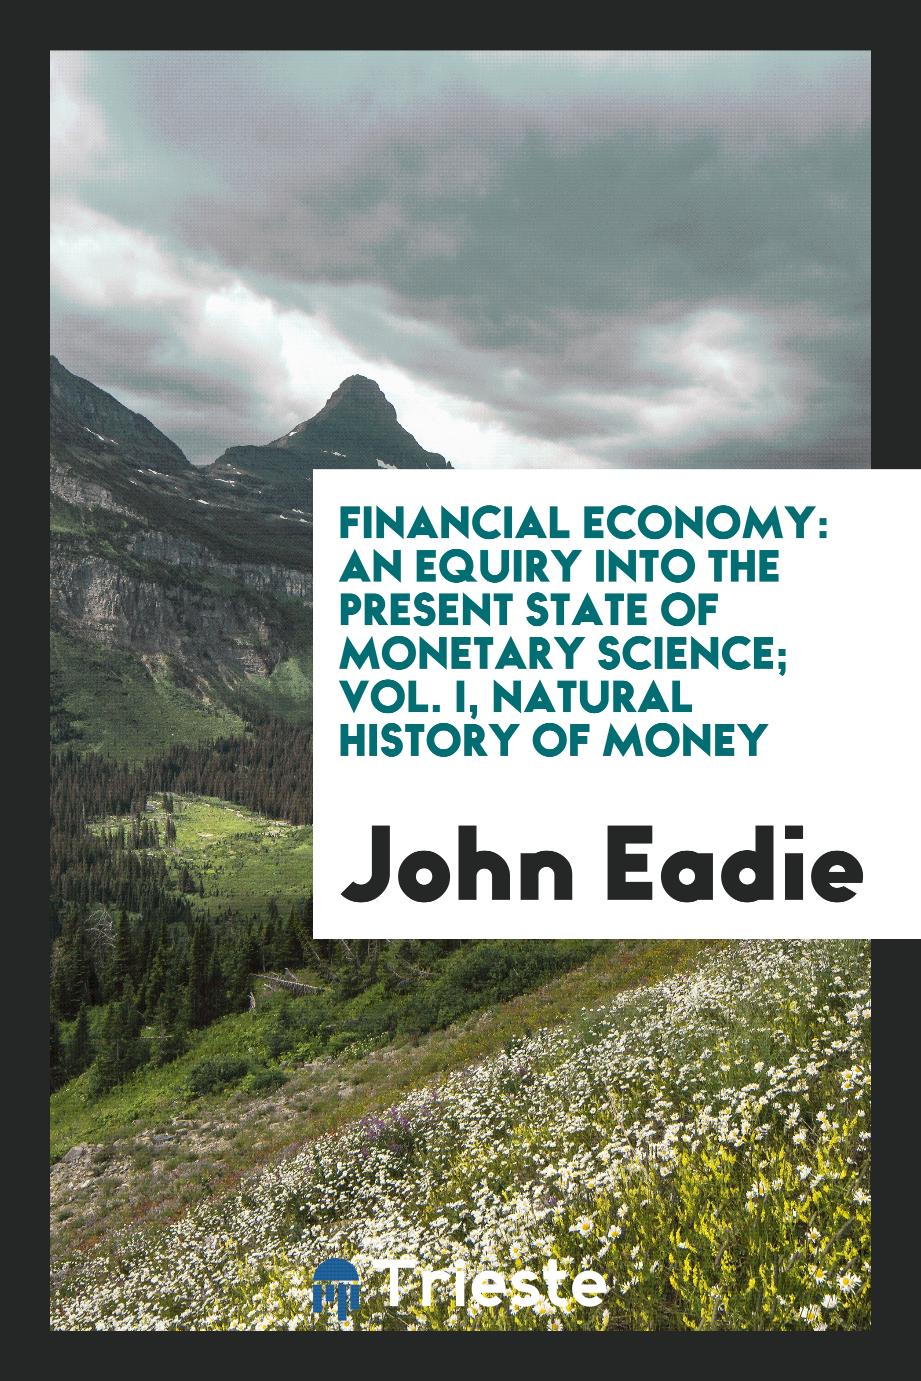 Financial Economy: An Equiry Into the Present State of Monetary Science; Vol. I, Natural History of Money